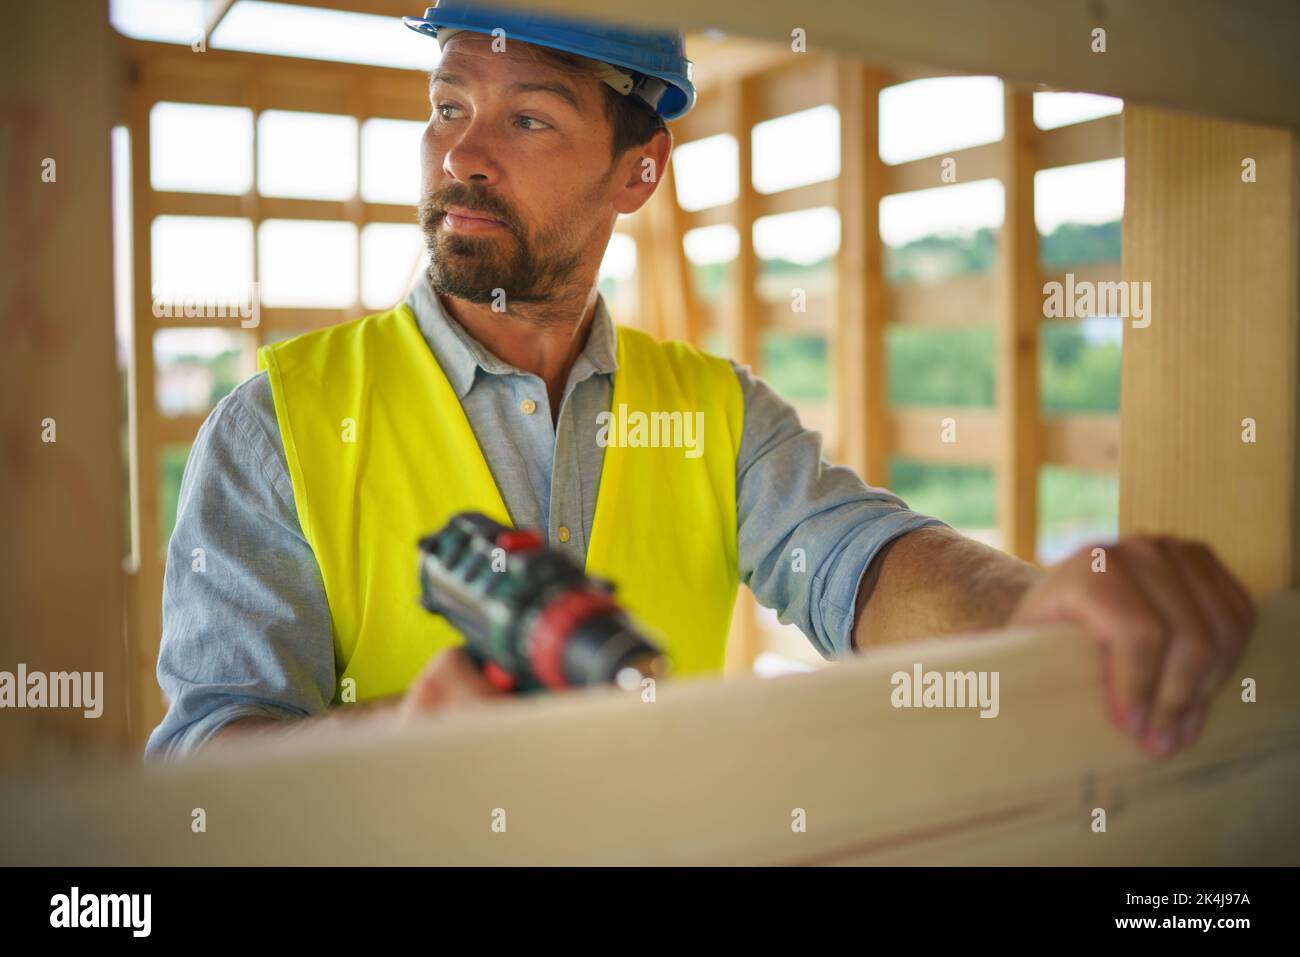 Construction worker working with electric screwdriver on wooden frame, diy eco-friendly homes concept. Stock Photo